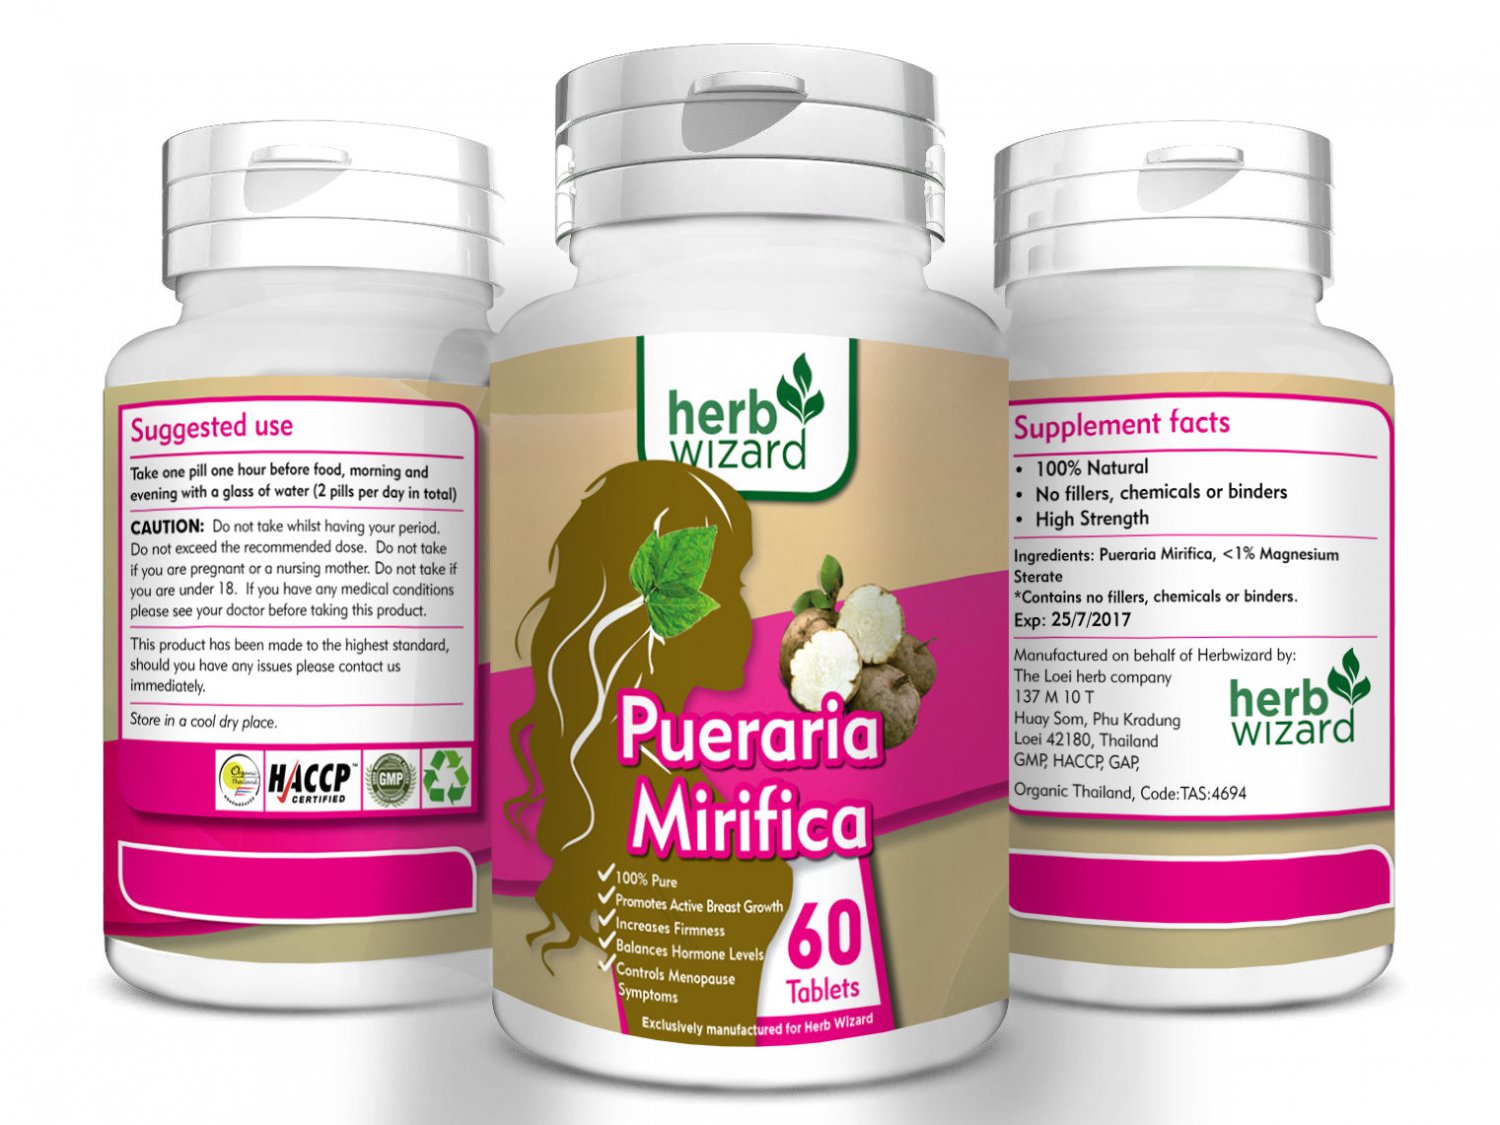 Pueraria mirifica 3000mg bust firming breast enlargement capsules.